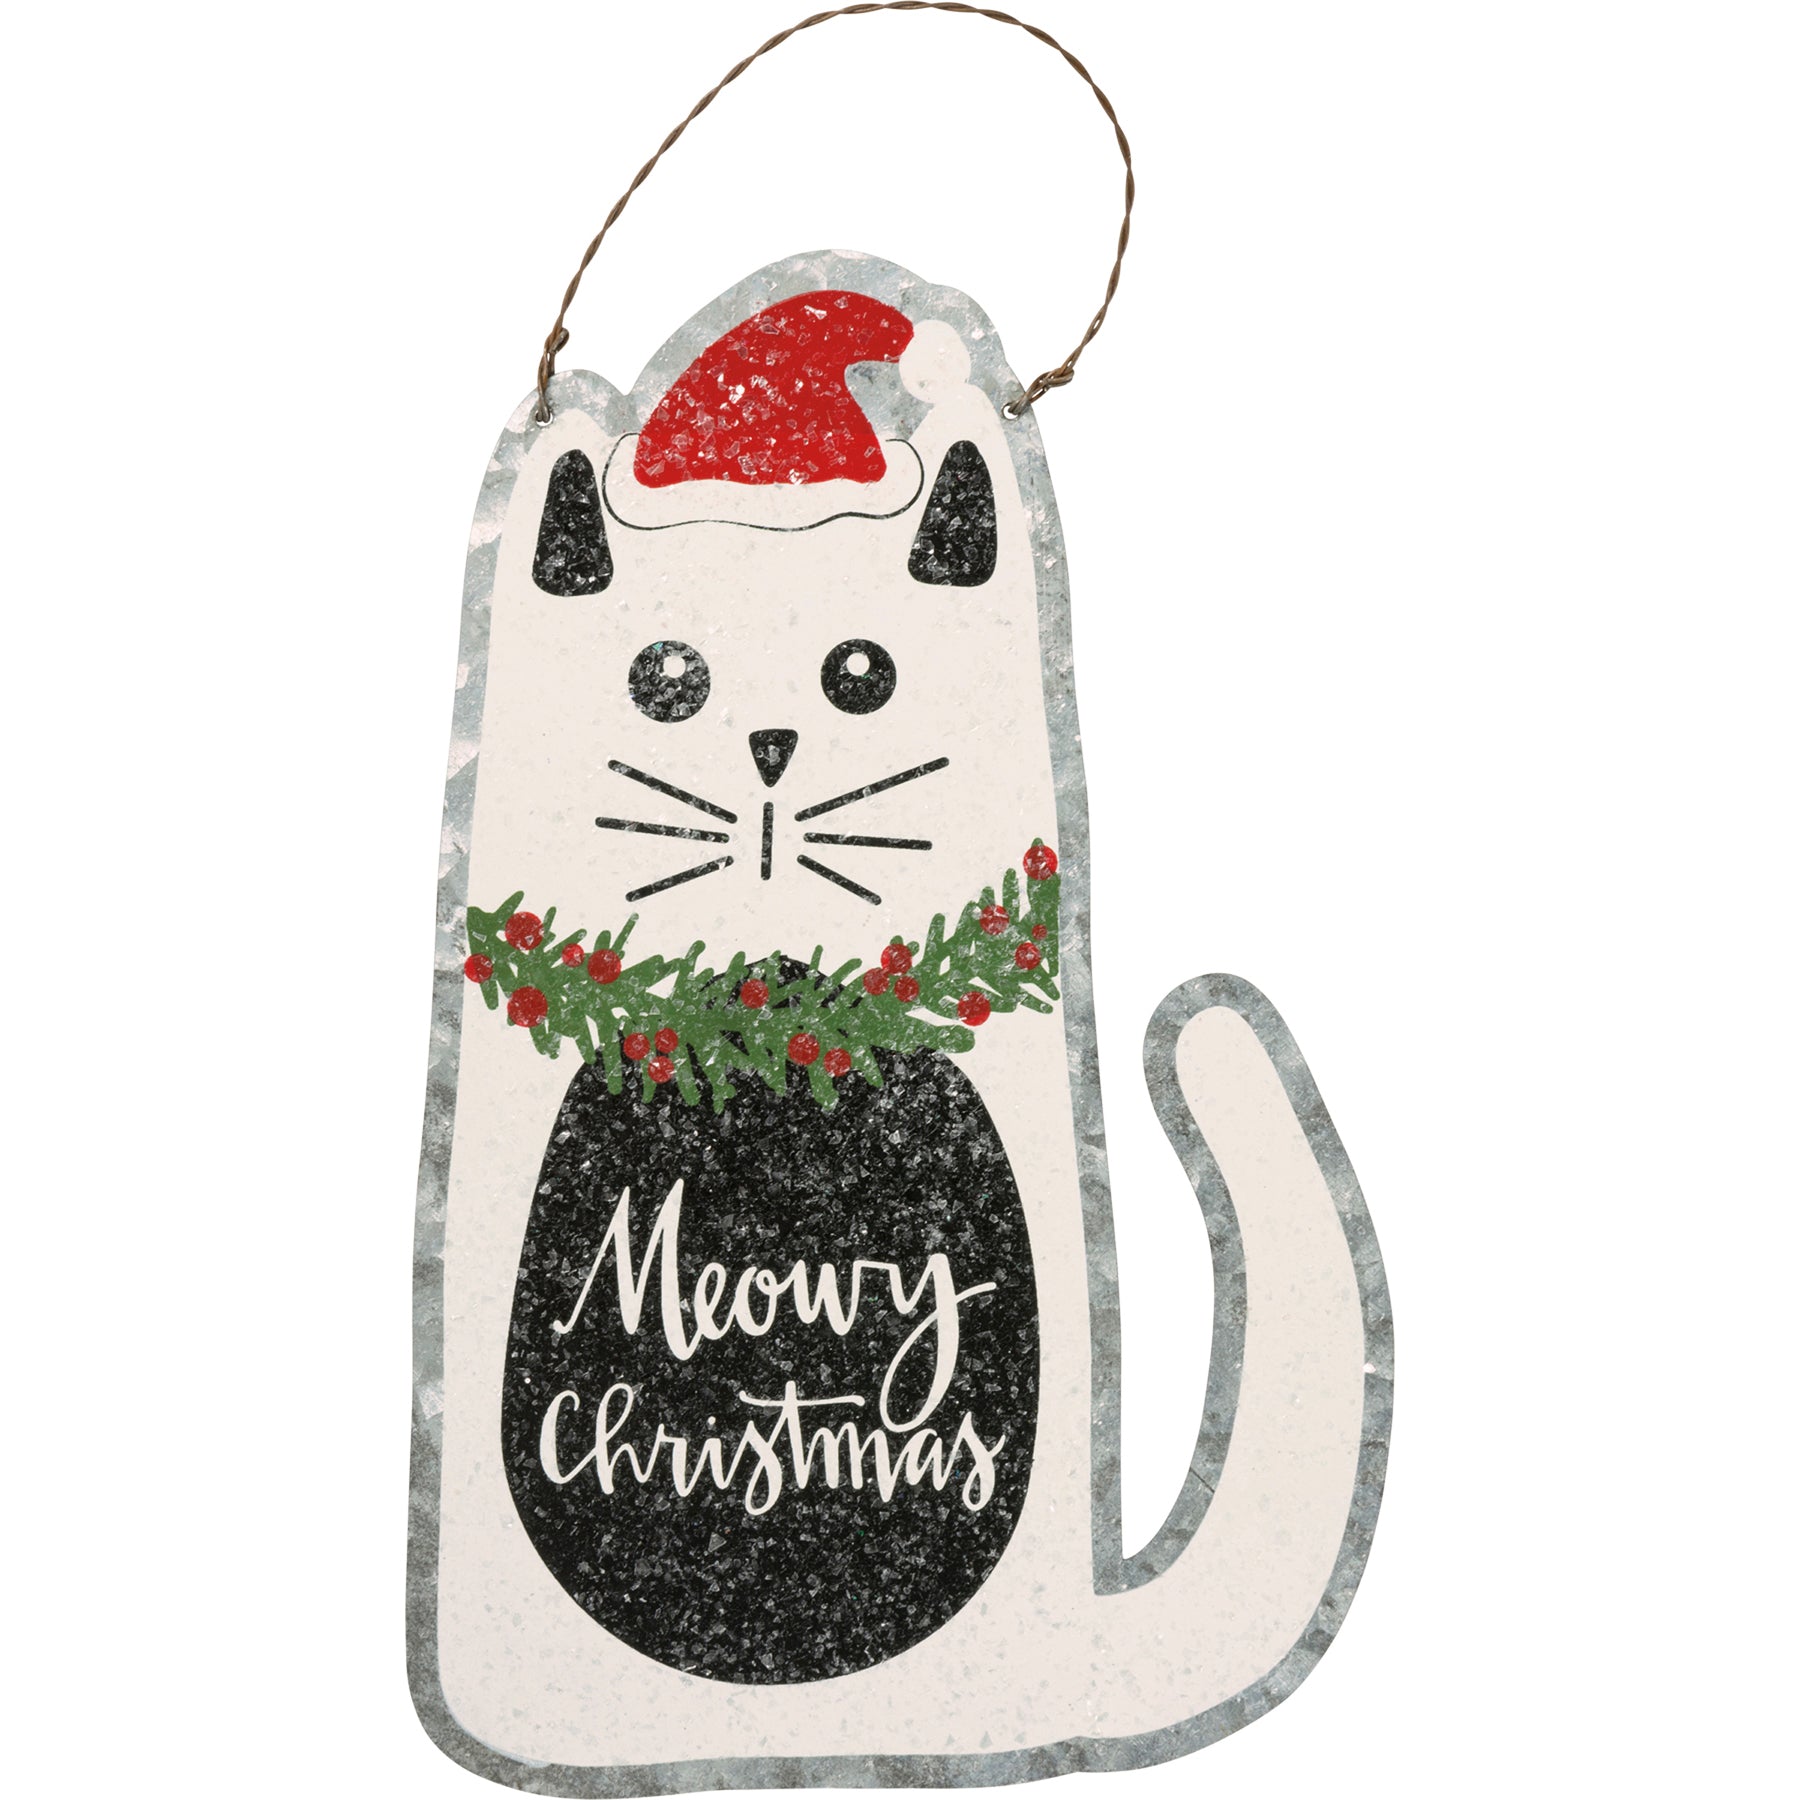 The Canton Christmas Shop Meowy Christmas Santa hat Wreath Wearing Cat Ornament with Glittery Snow made of metal on Christmas tree